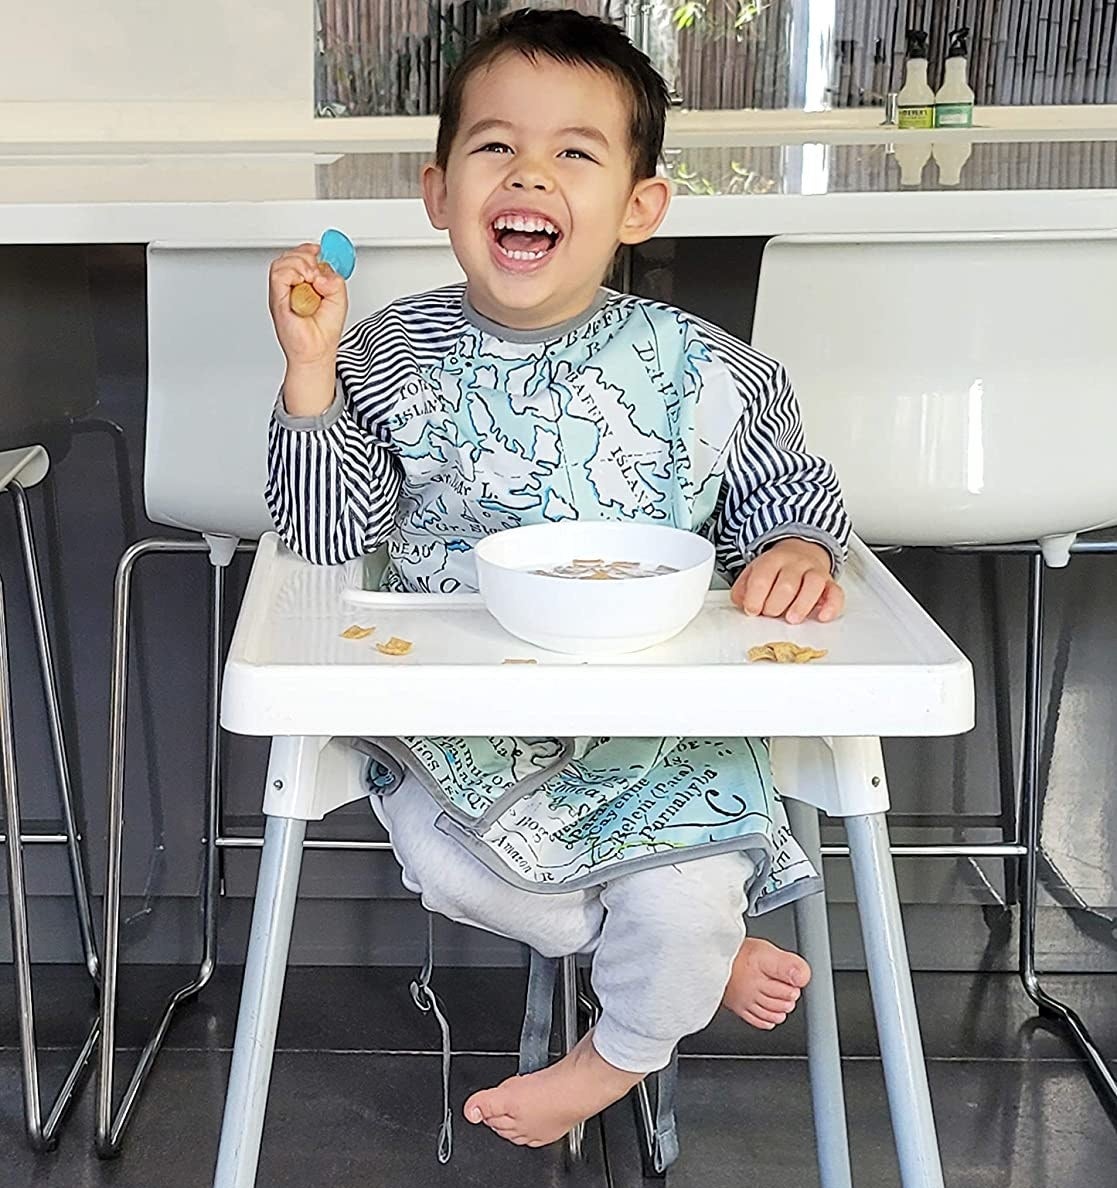 a child model wearing the long sleeve bib while siting in a high chair